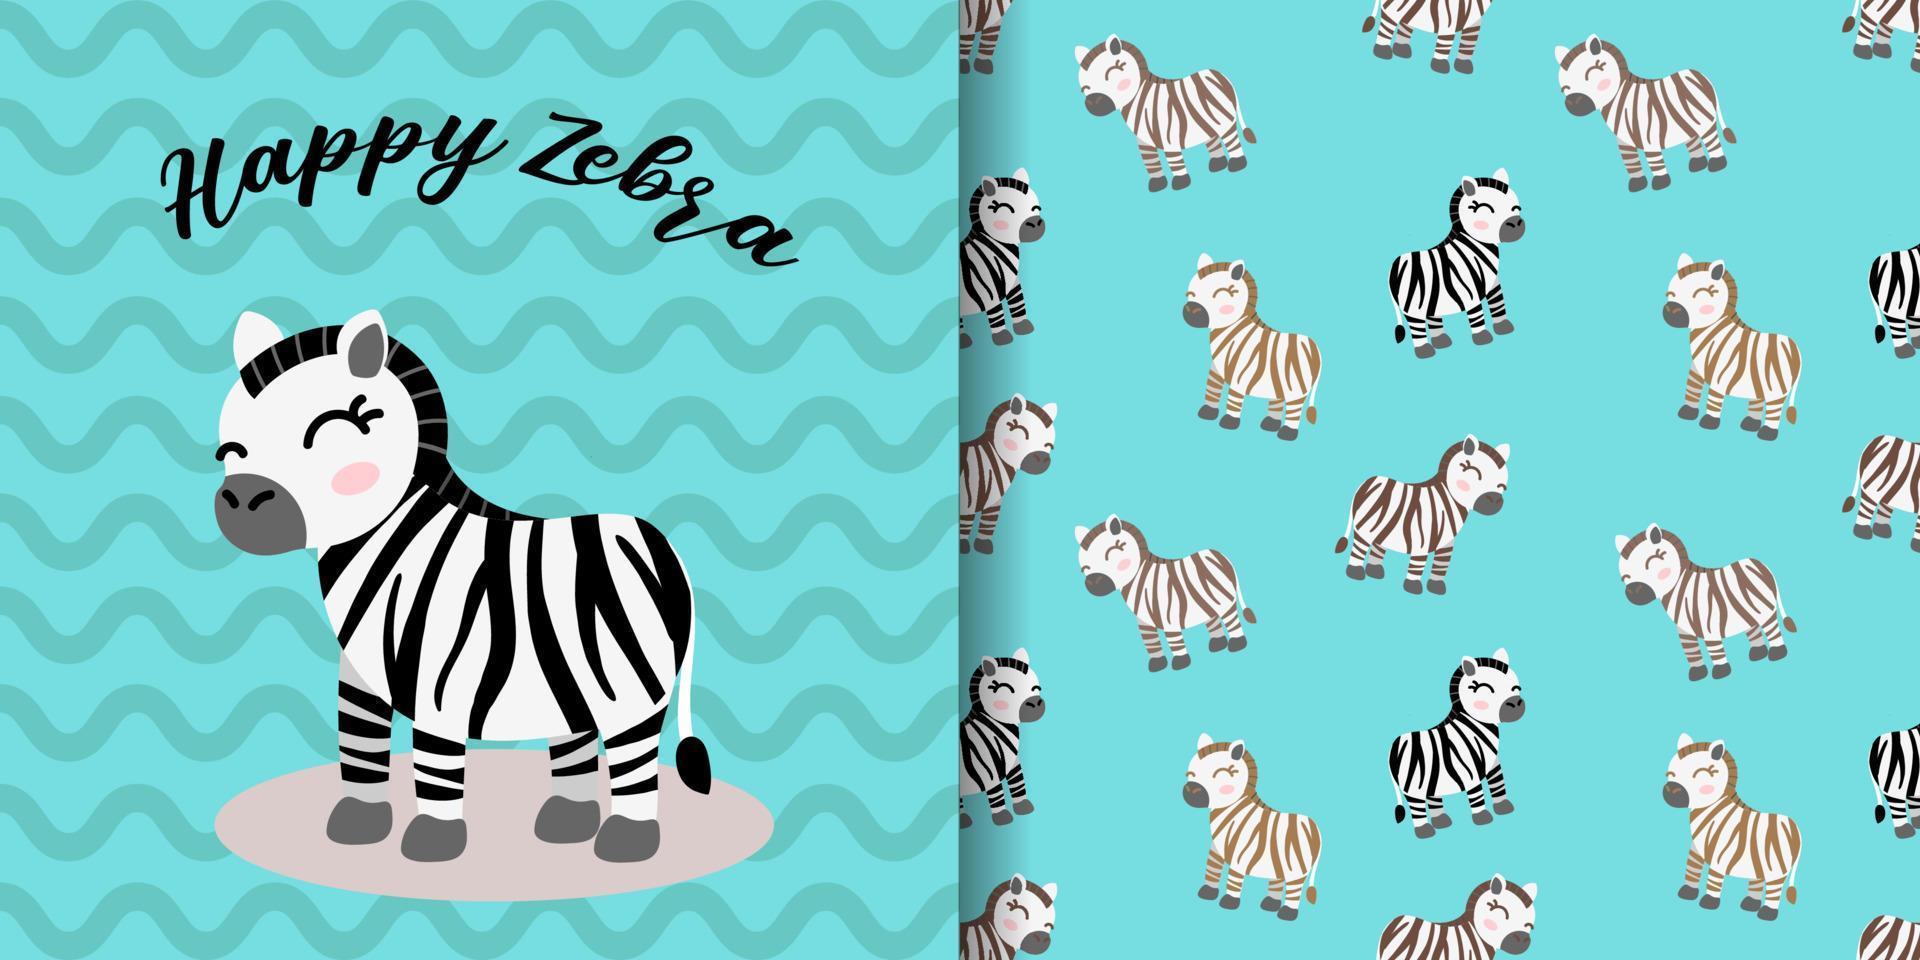 Cute zebra seamless pattern with illustration cartoon baby shower card vector